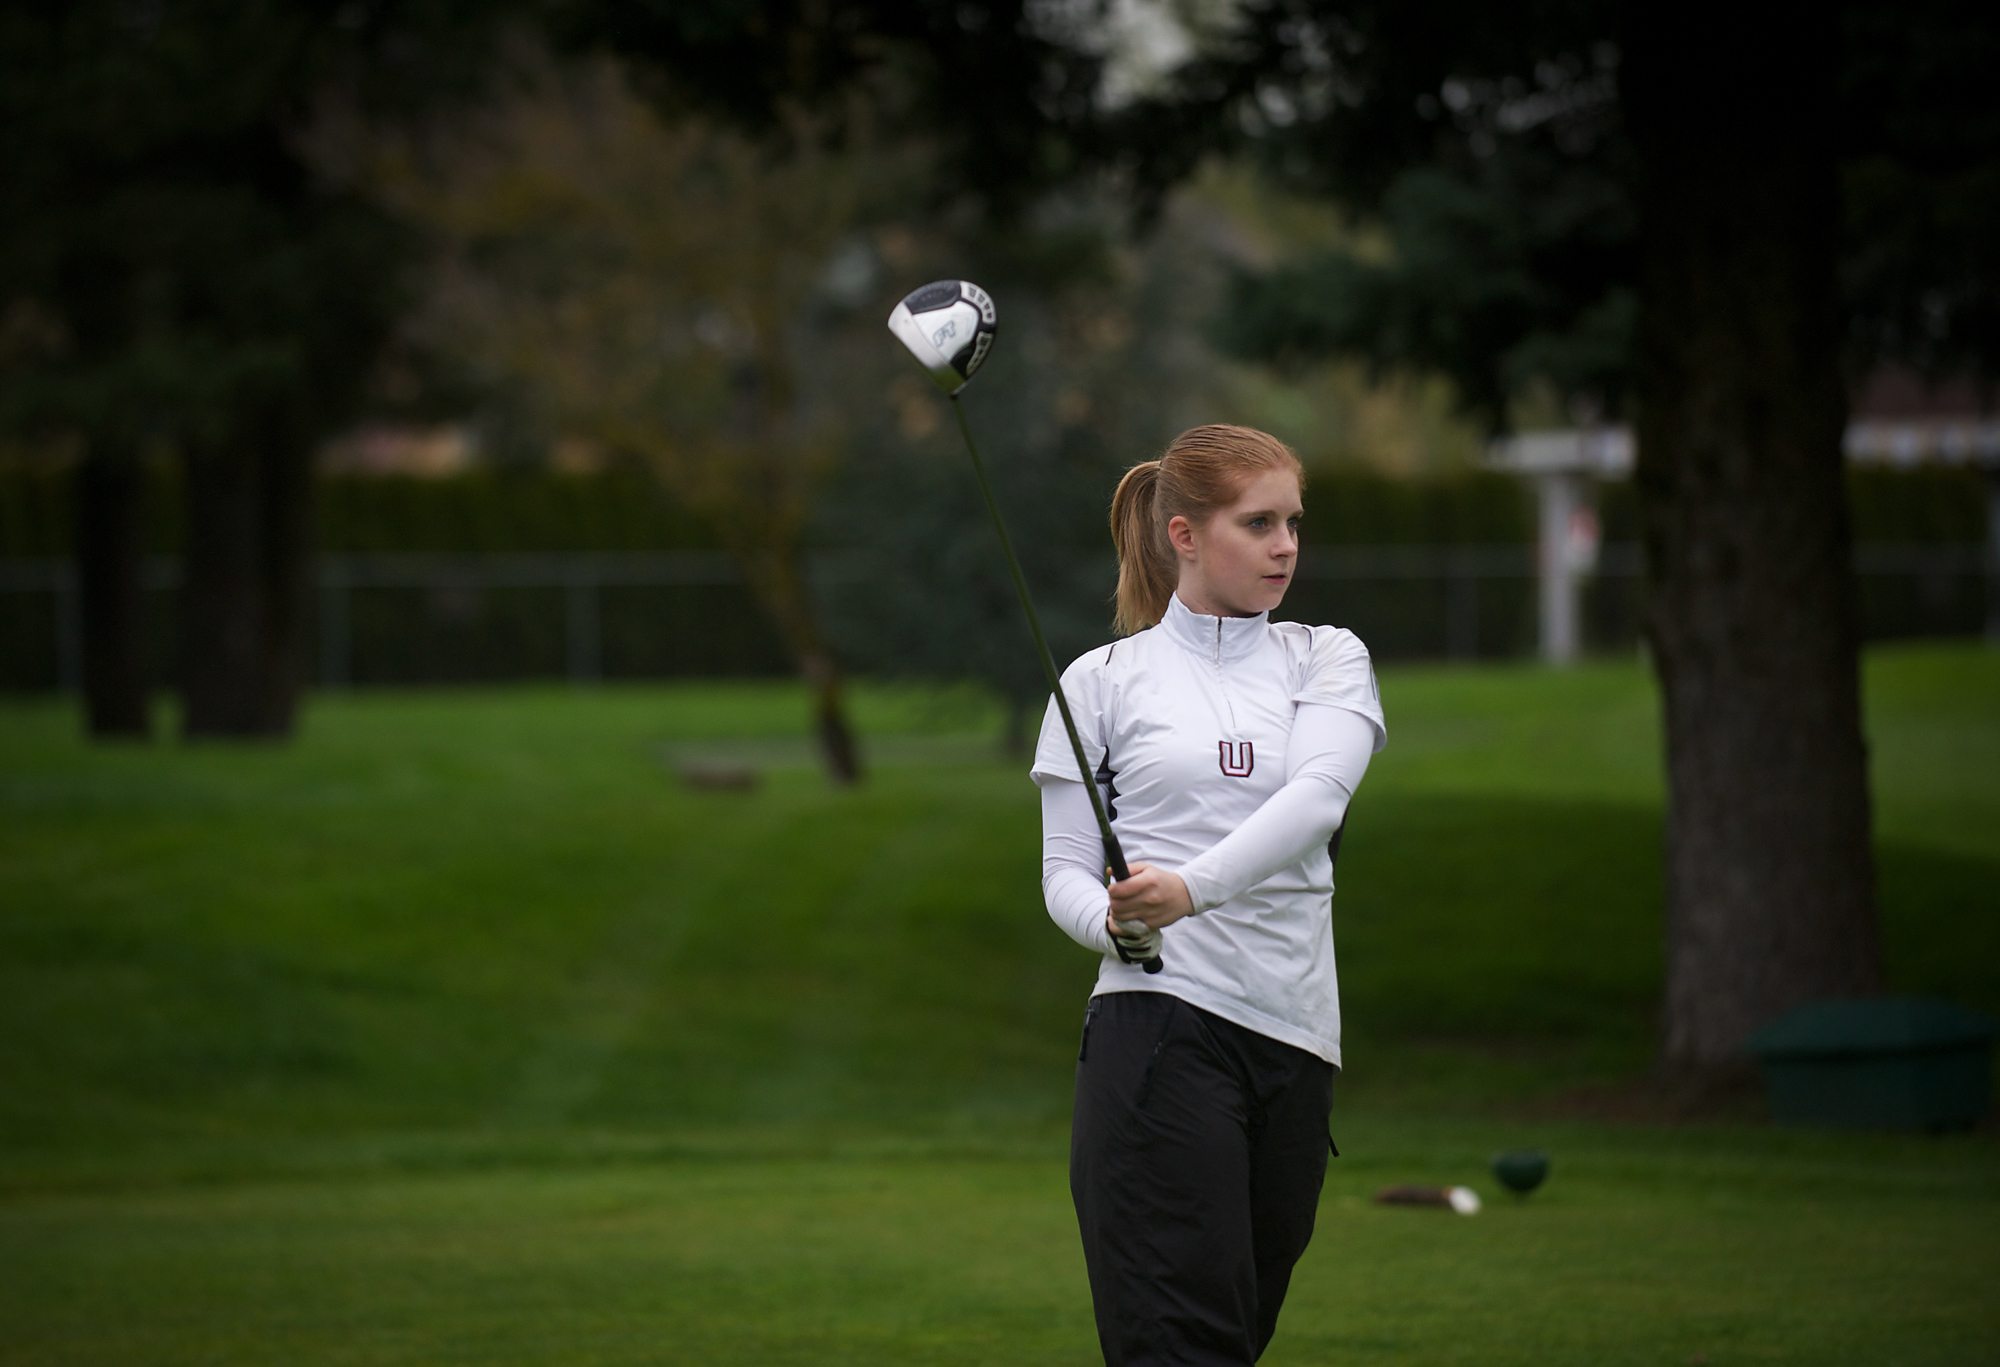 Medication, therapy and specially designed golf clubs have allowed Union's Lauren Williams to continue to play golf with rheumatoid arthritis.